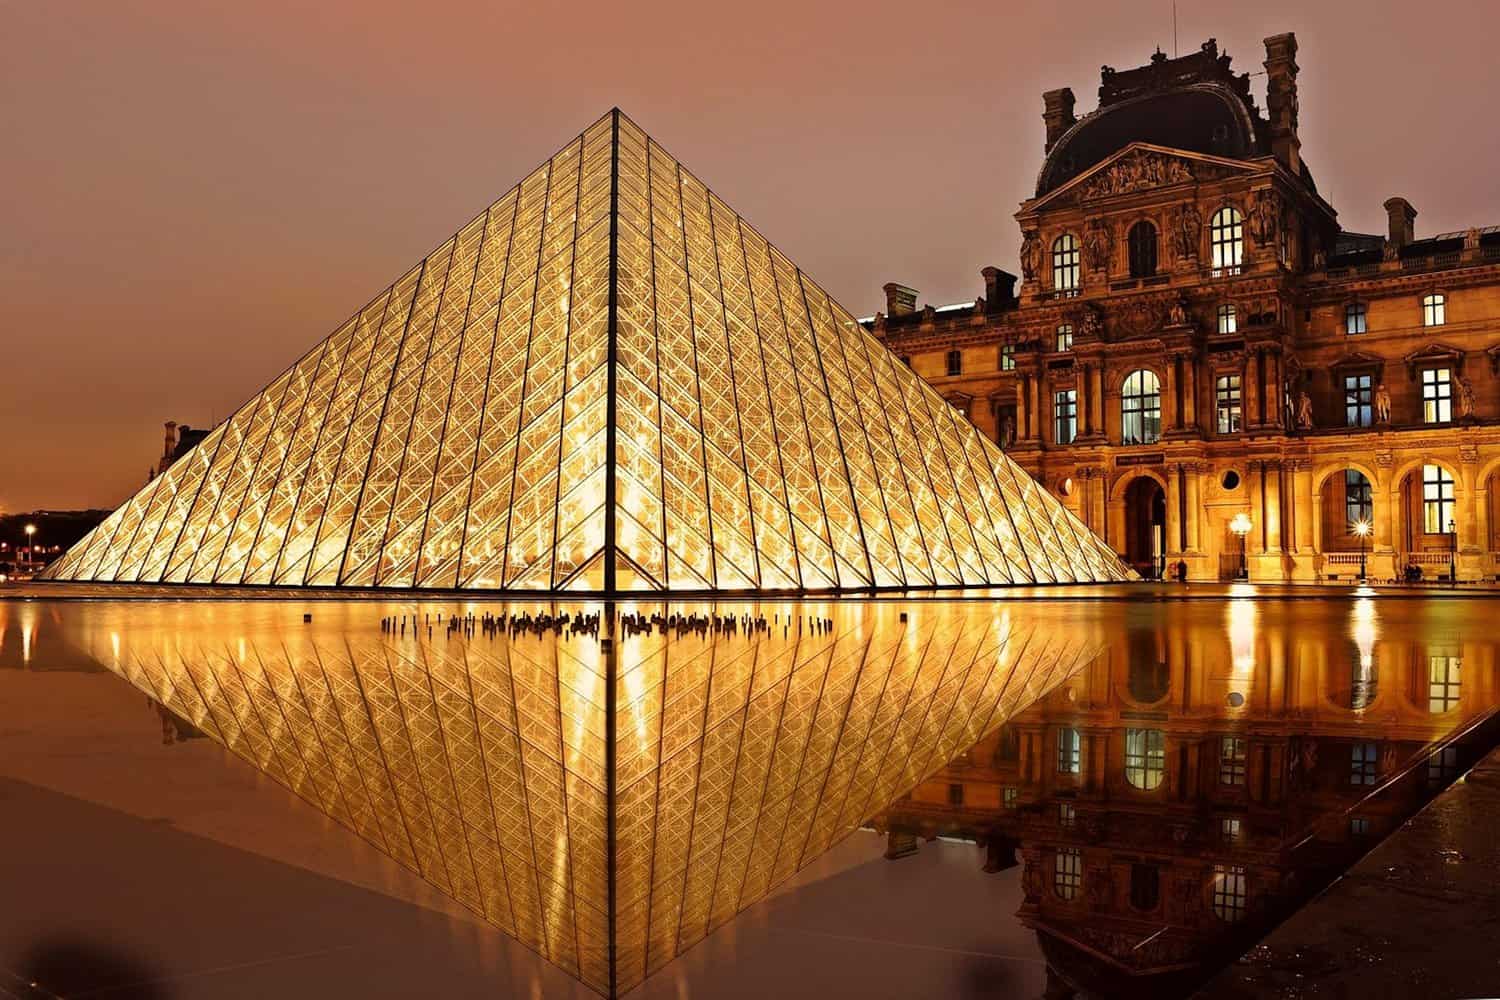 the lovre museum clear glass pyramid museum contrasting with historical stone building during golden hour. architecture like this makes paris one of the best travel destinations for design lovers